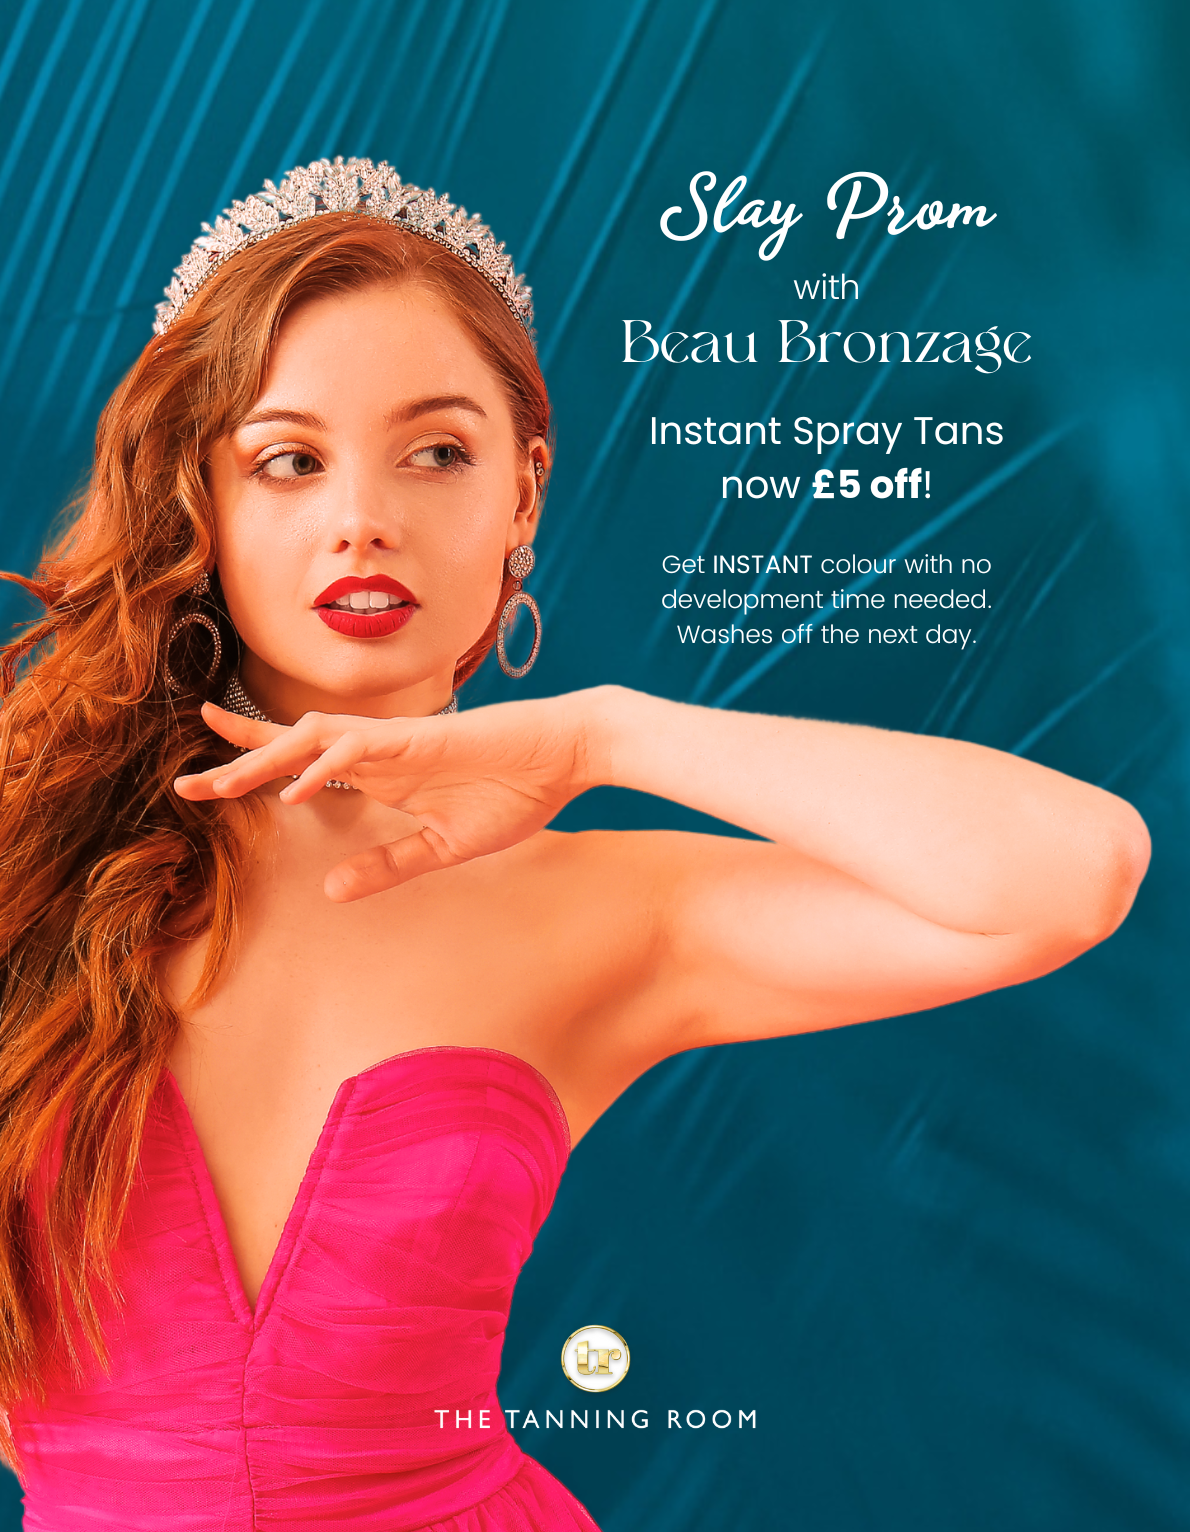 Slay prom with £5 off our Instant spray tans - get instant colour with no developing time needed 